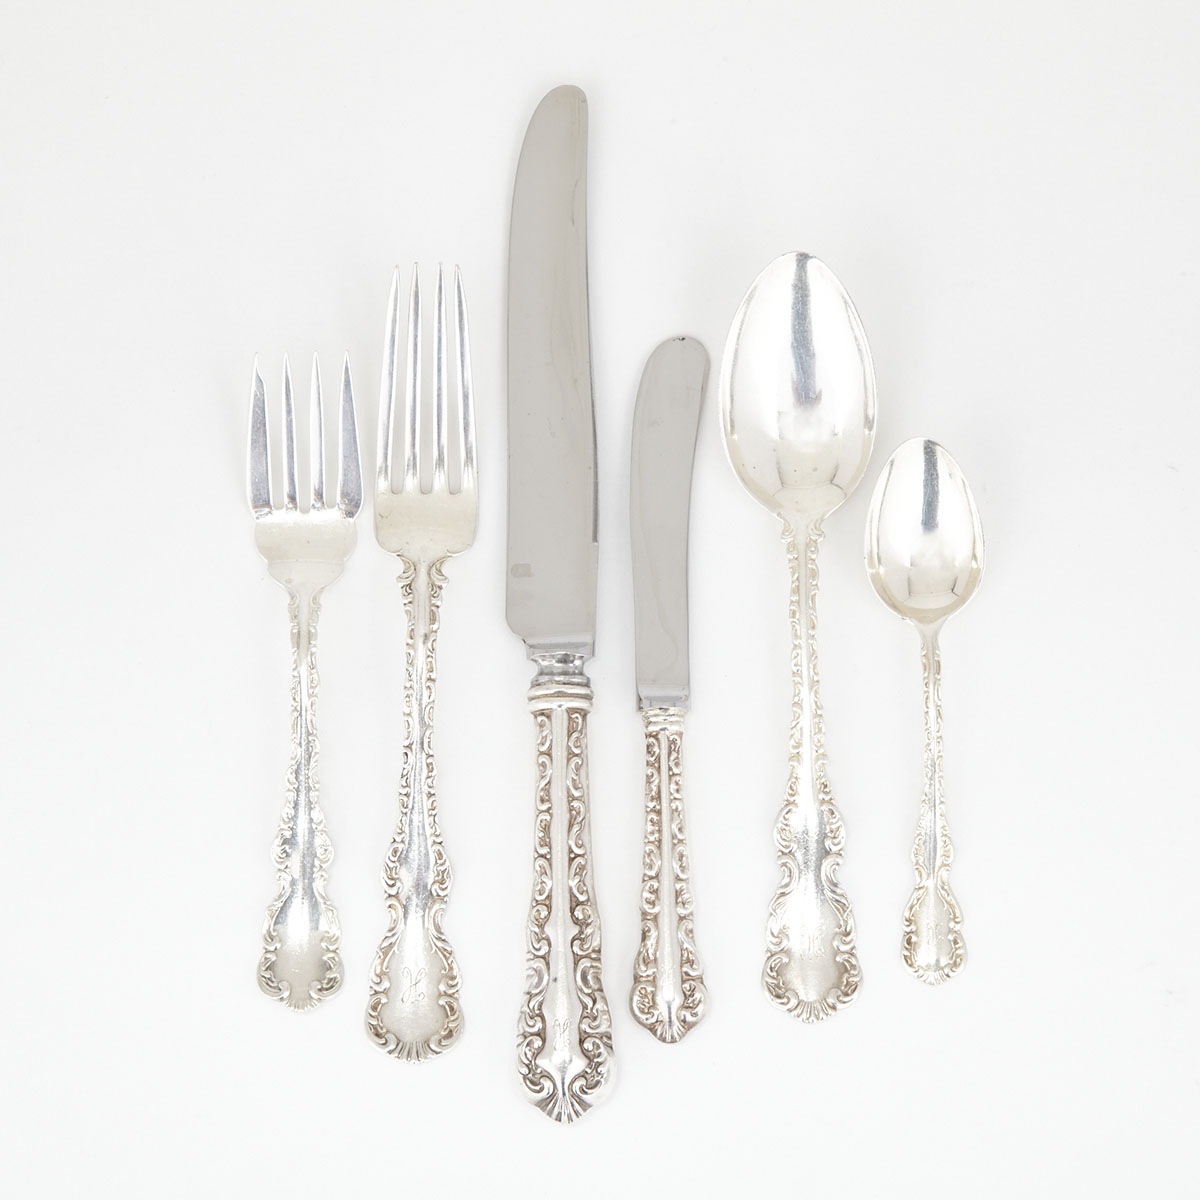 Canadian Silver ‘Louis XV’ Pattern Flatware, Roden Bros., Toronto, Ont. and Henry Birks & Sons, Montreal, Que., early 20th century